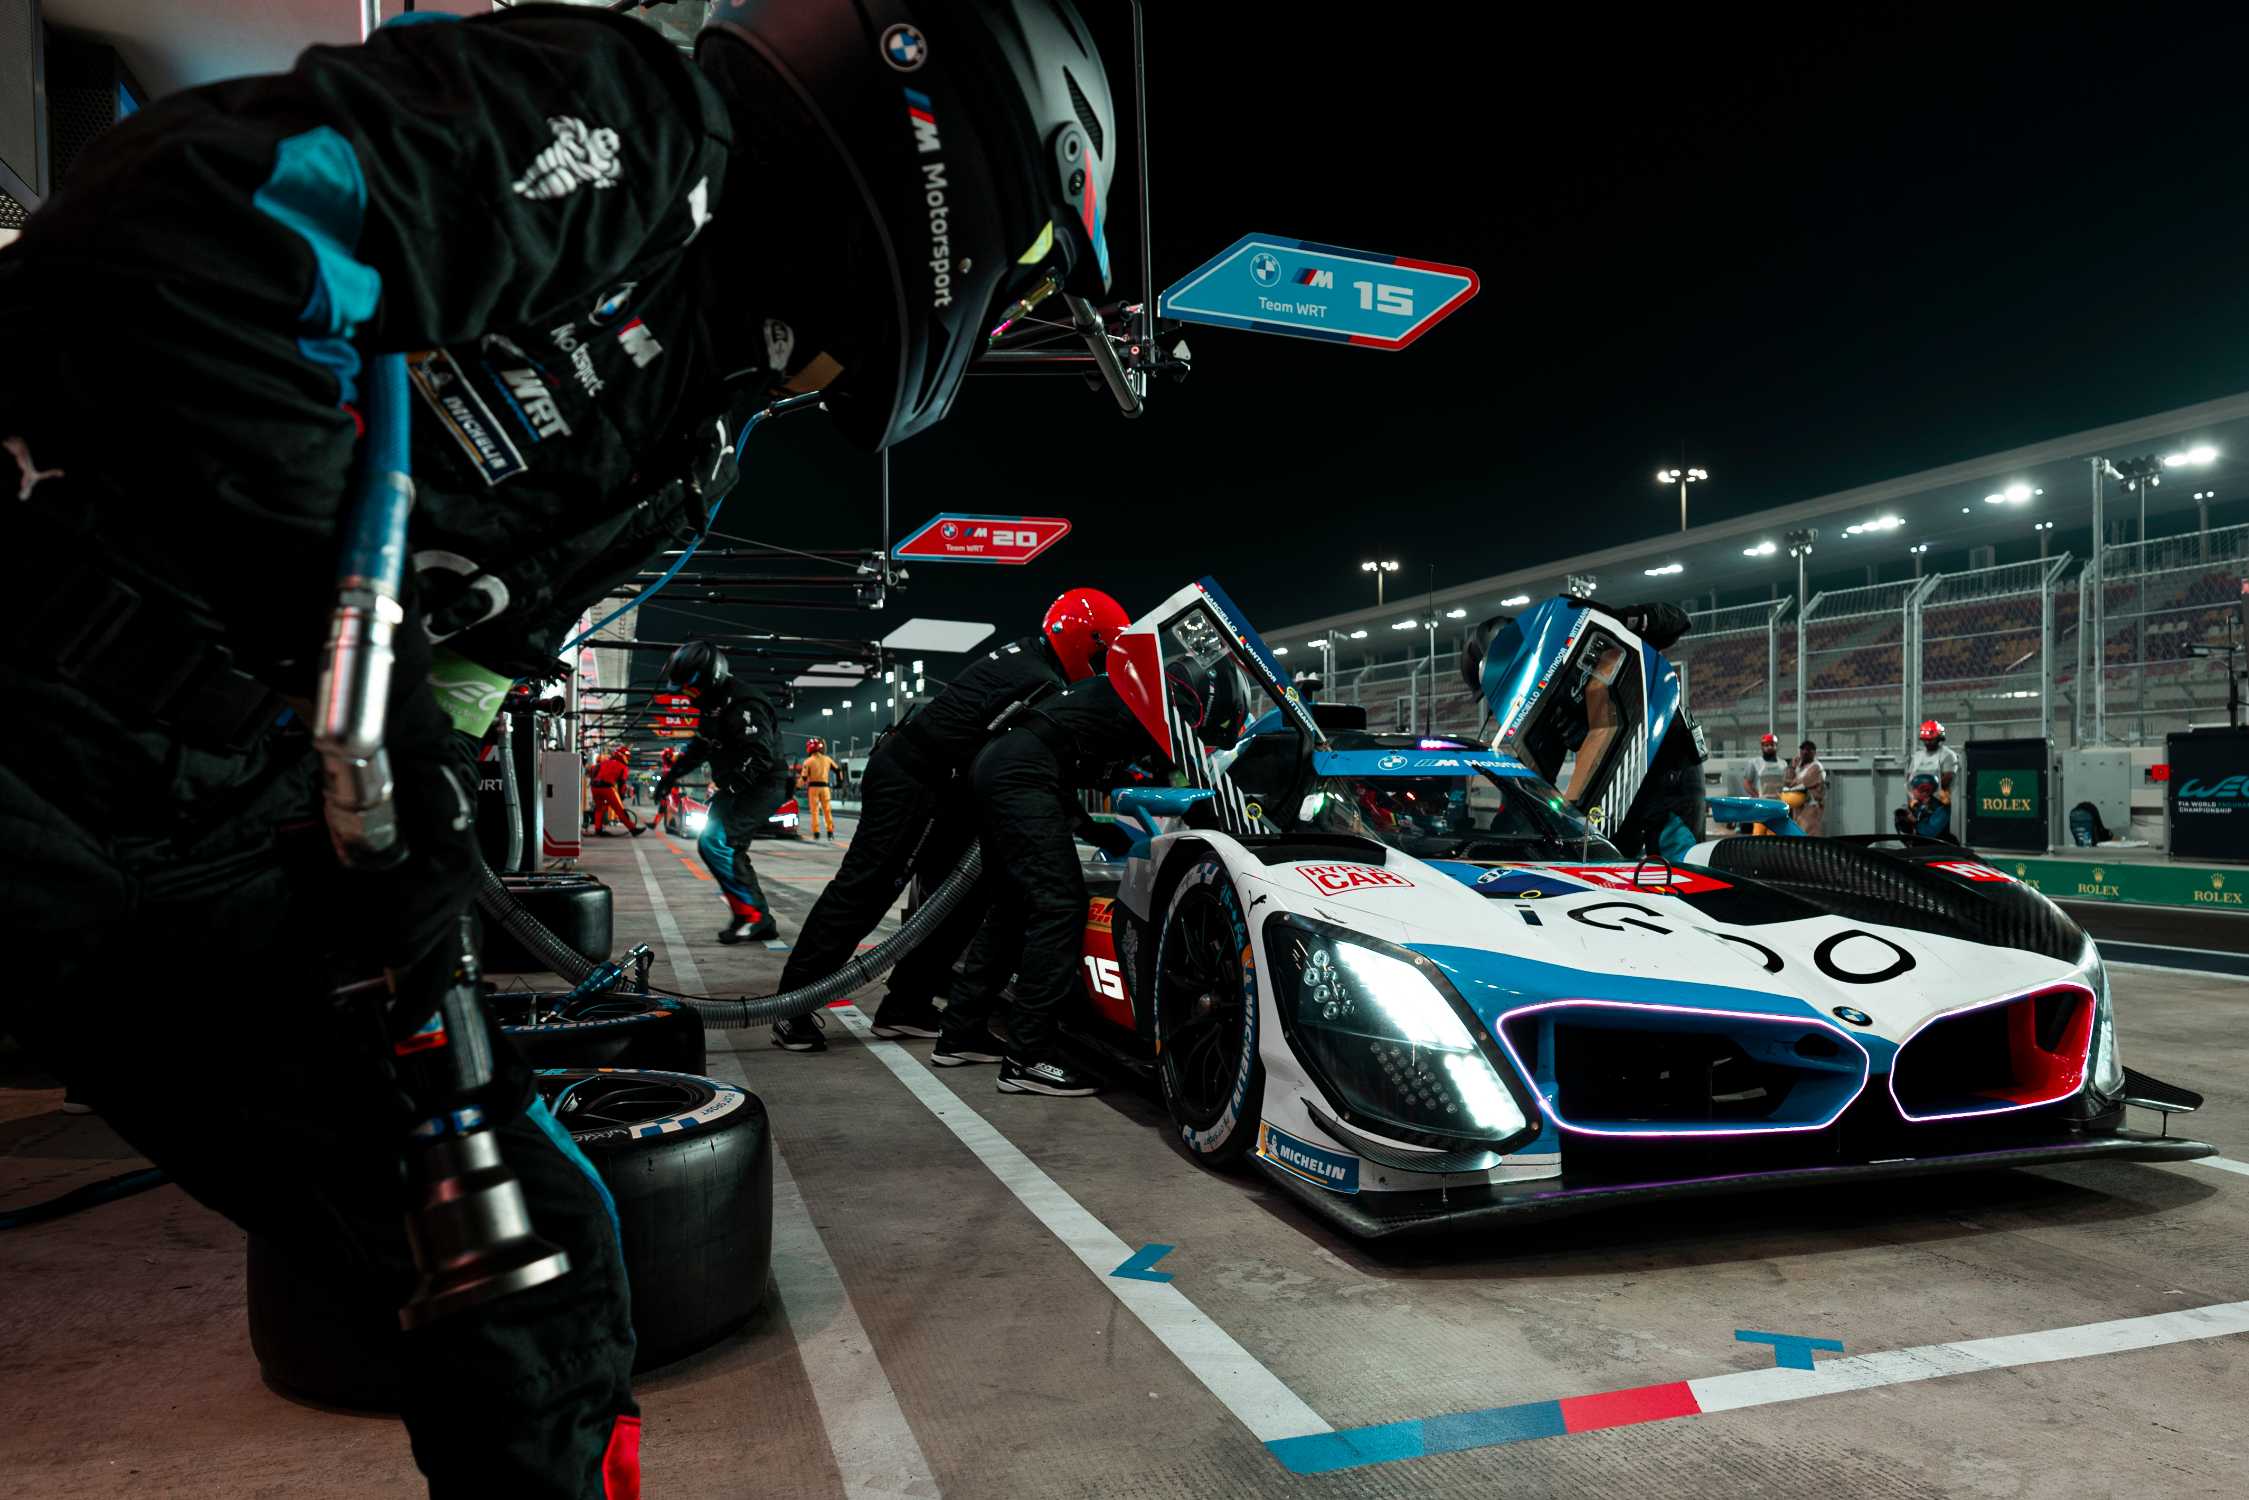 FIA WEC: BMW M Motorsport Media Guide, video interviews and initial impressions after the Prologue in Qatar.